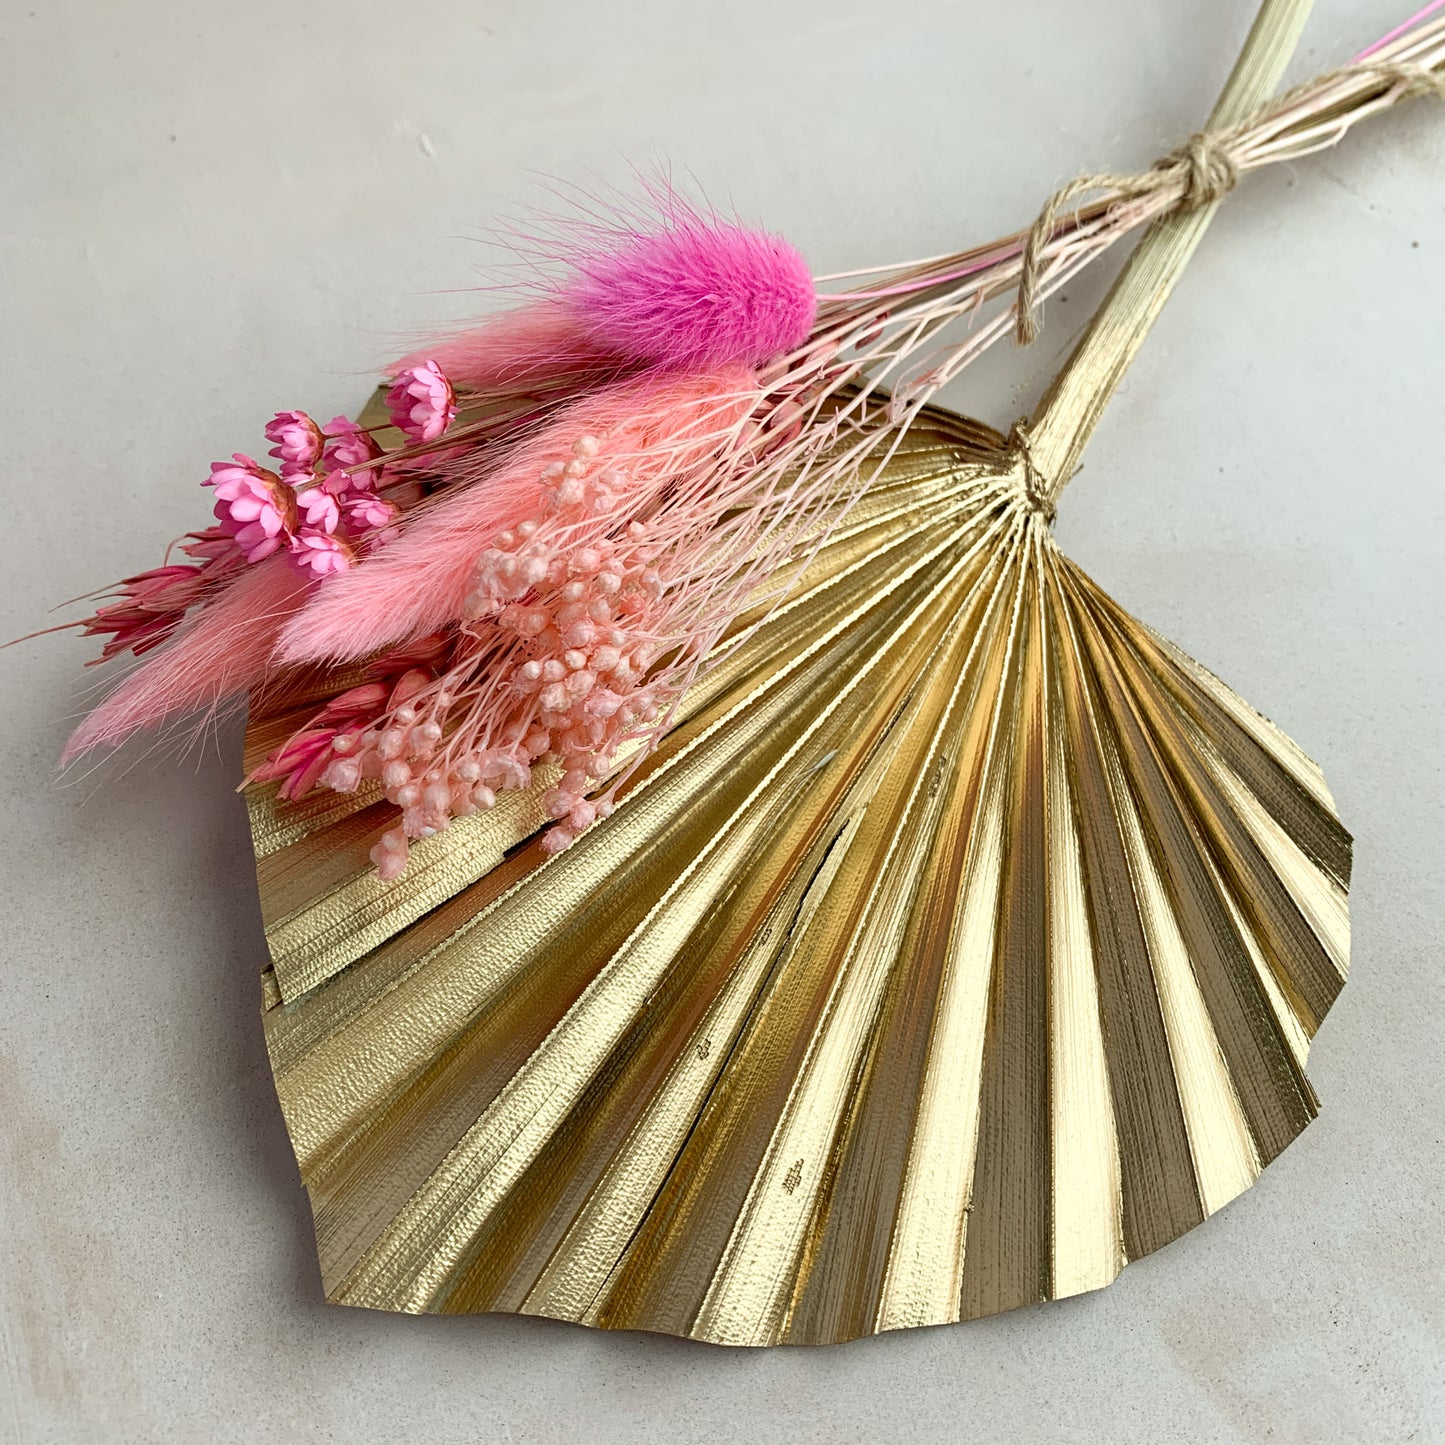 Gold and pink palm spear set - not so perfect